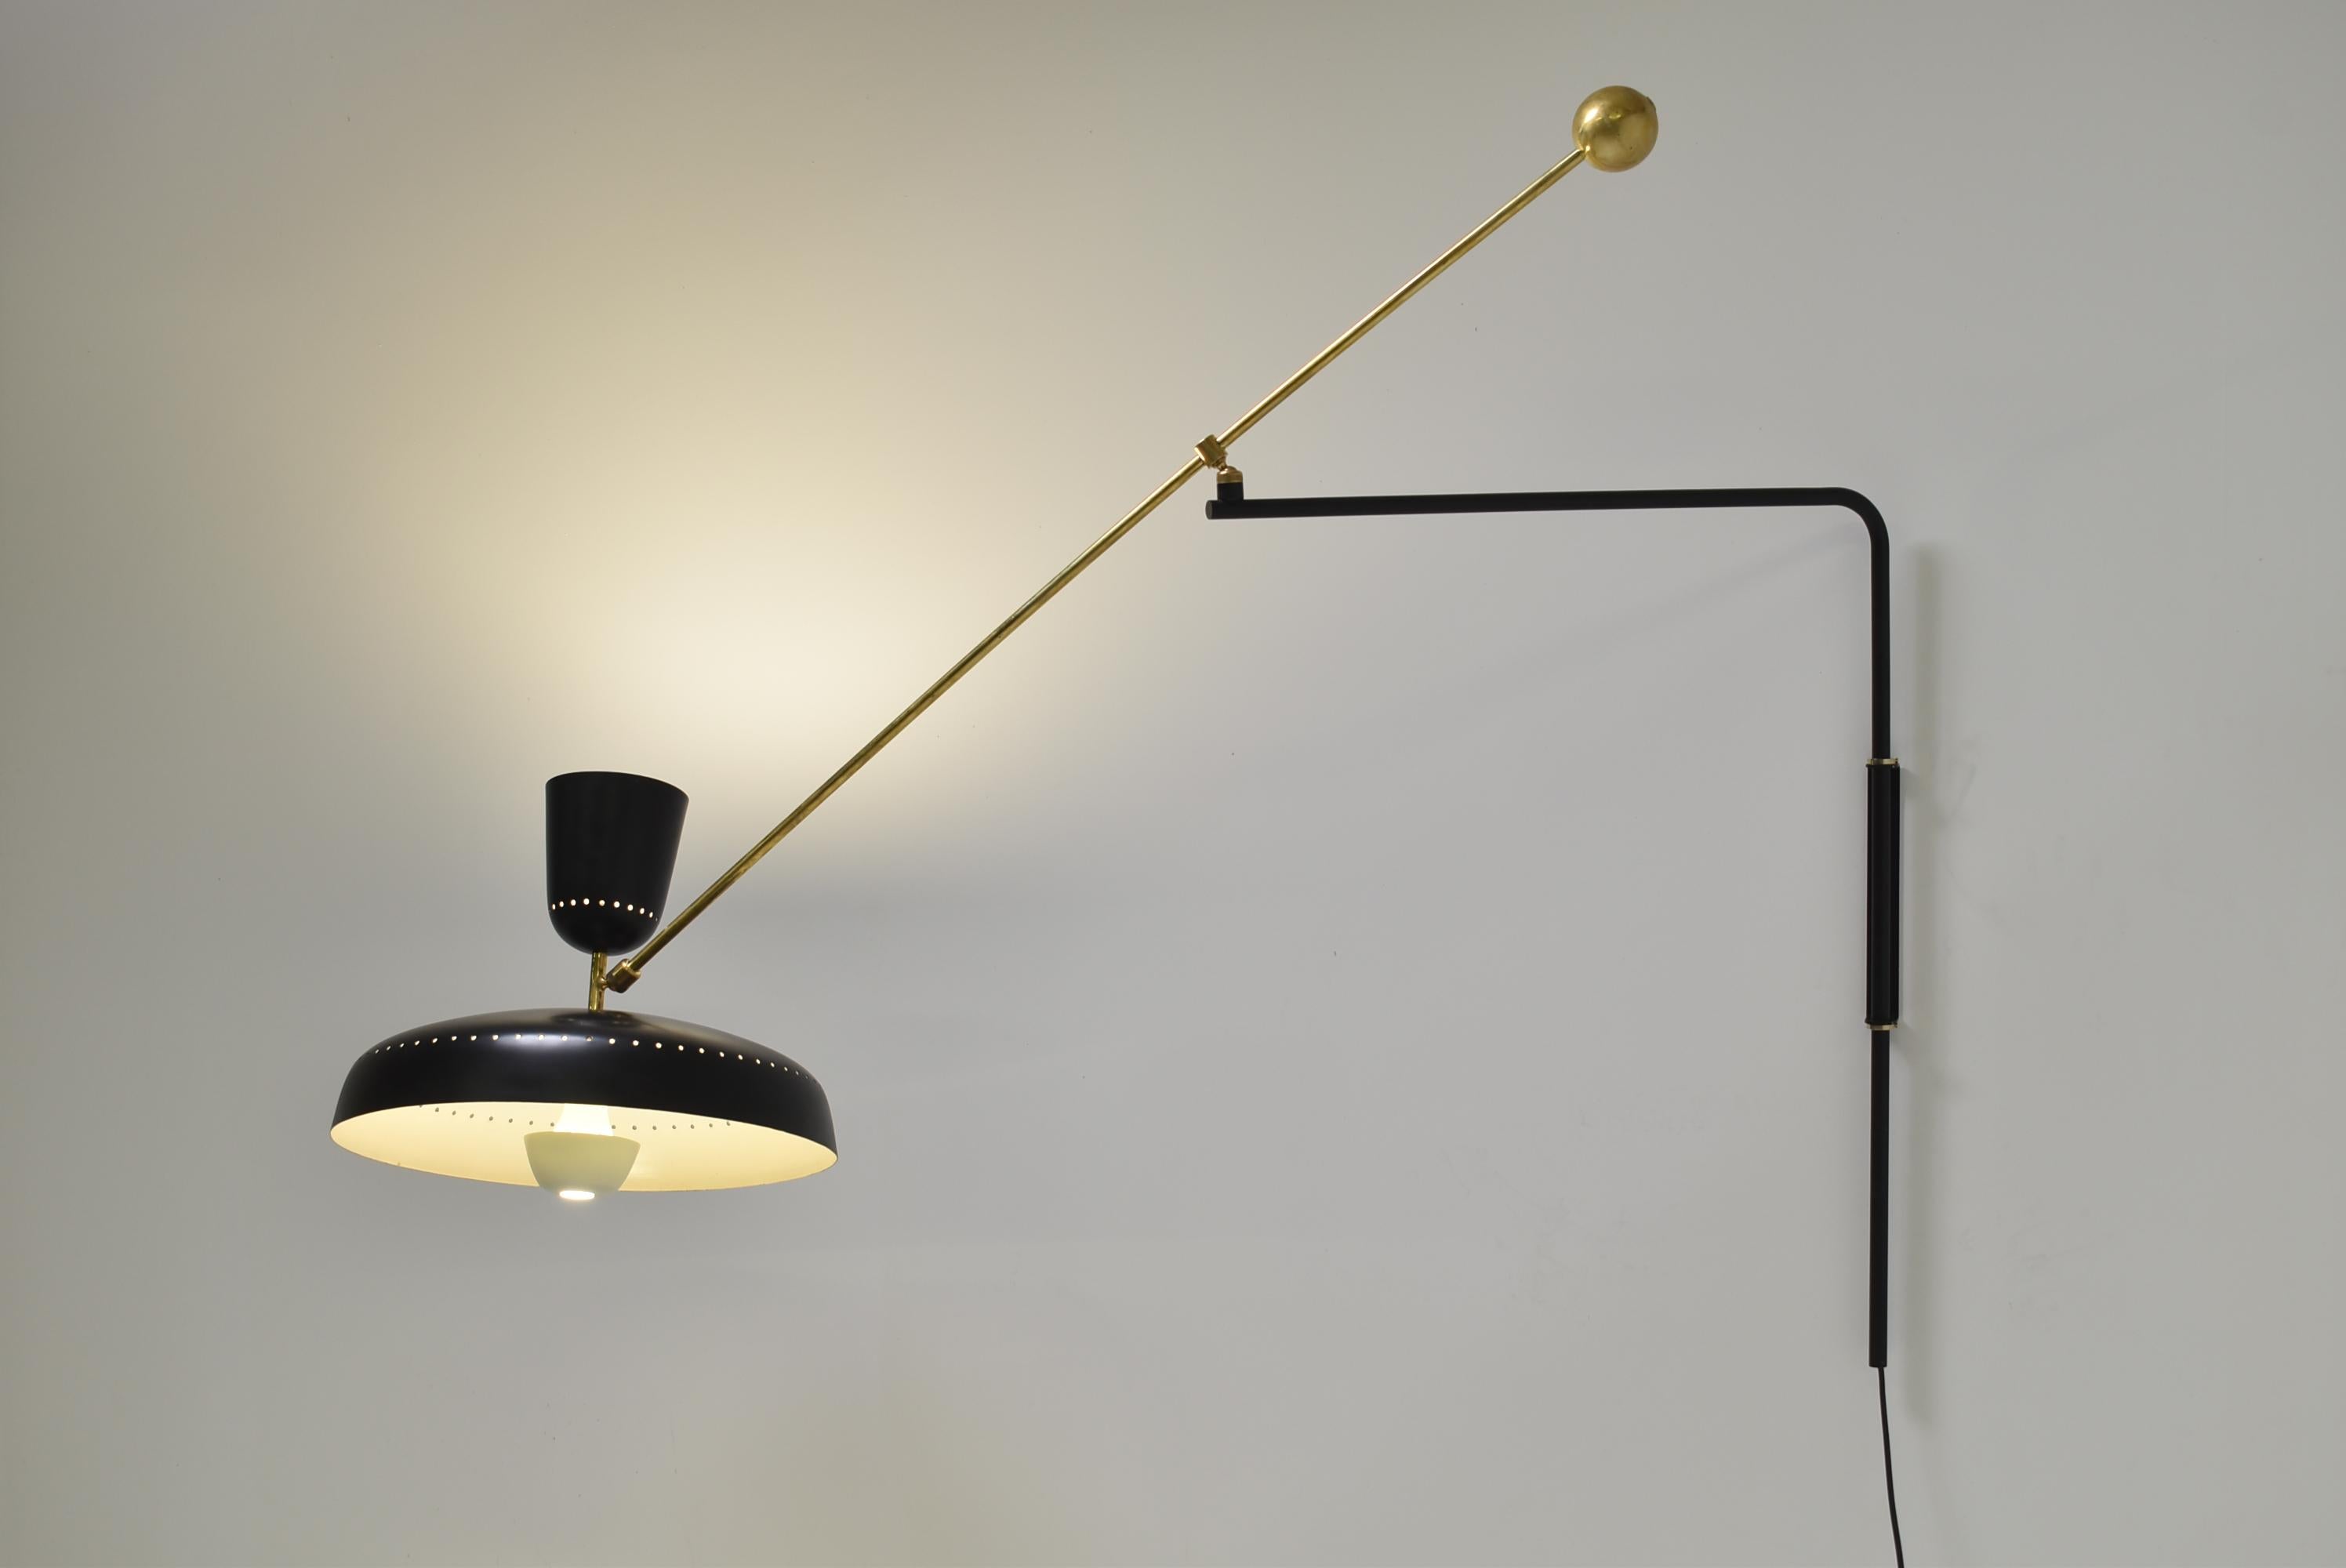 Rare G1 wall lamp by Pierre Guariche.
Original model of 1952.
Black laquered and perforated metal shades, brass arm and counterweight.
Light source on each lampshade, adjustable in all directions thanks to the genius of Pierre Guariche.
This is